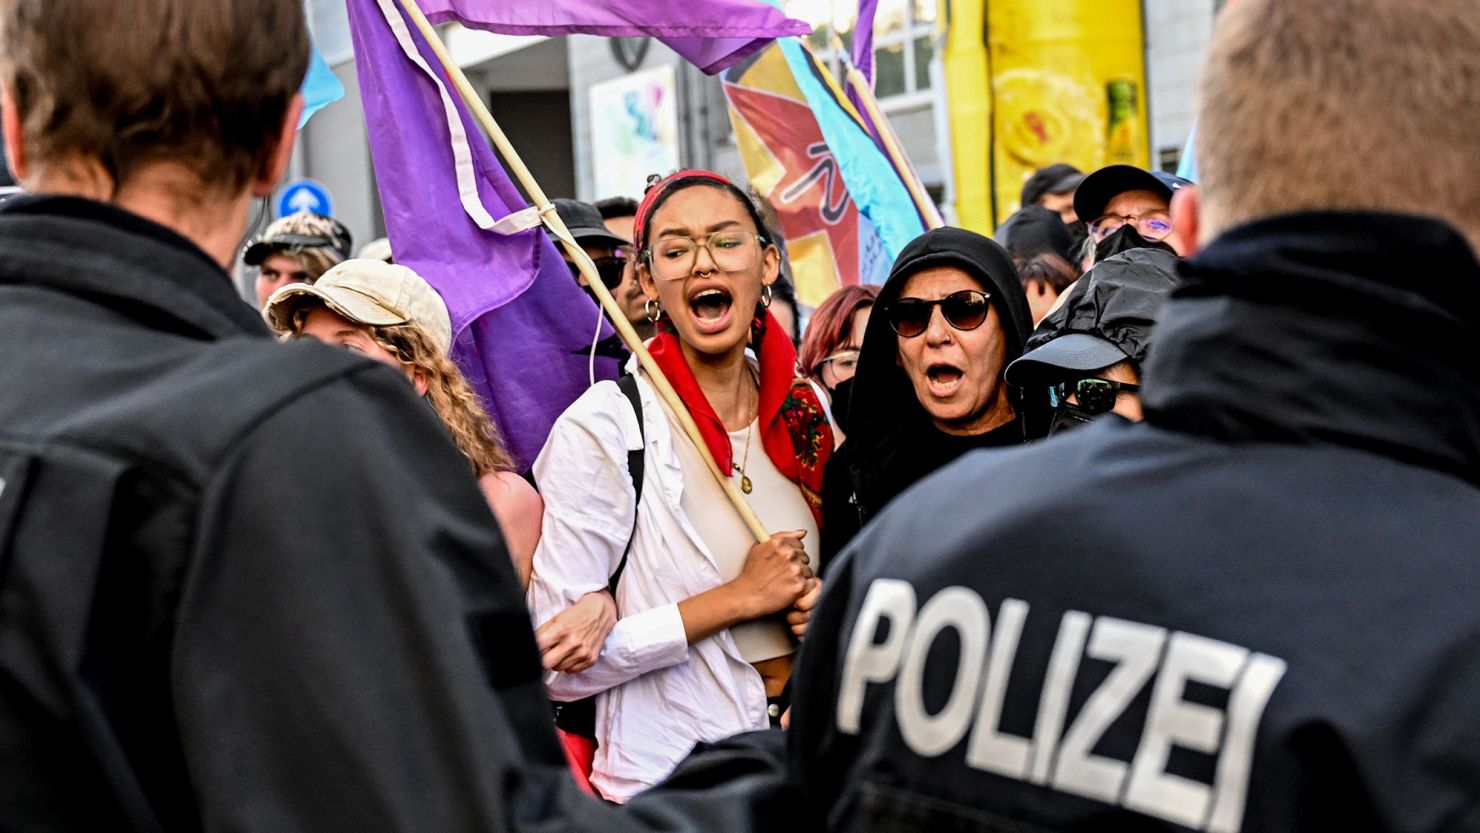 Protesters faced down police during a protest in solidarity with Lina E. in Berlin, Germany, on May 31.